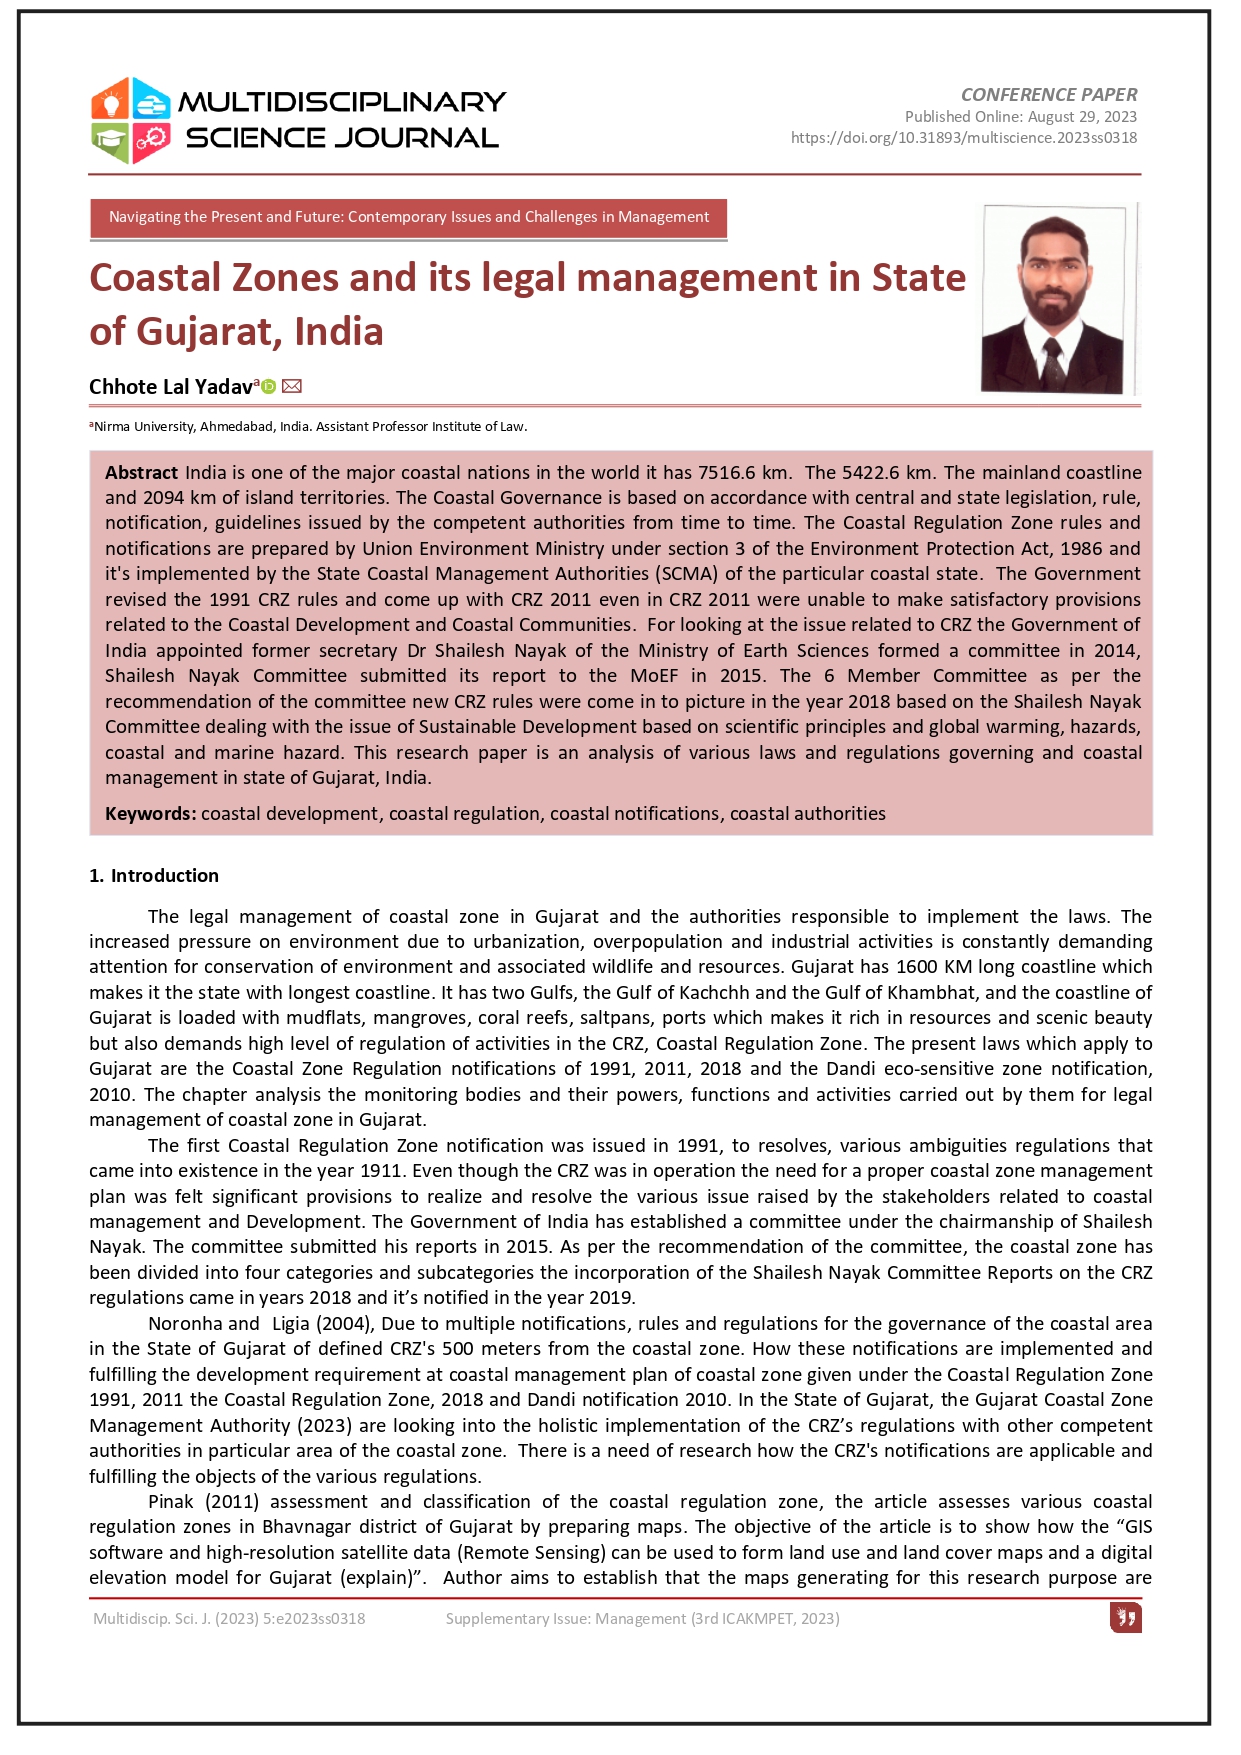 Coastal Zones and its legal management in State of Gujarat, India